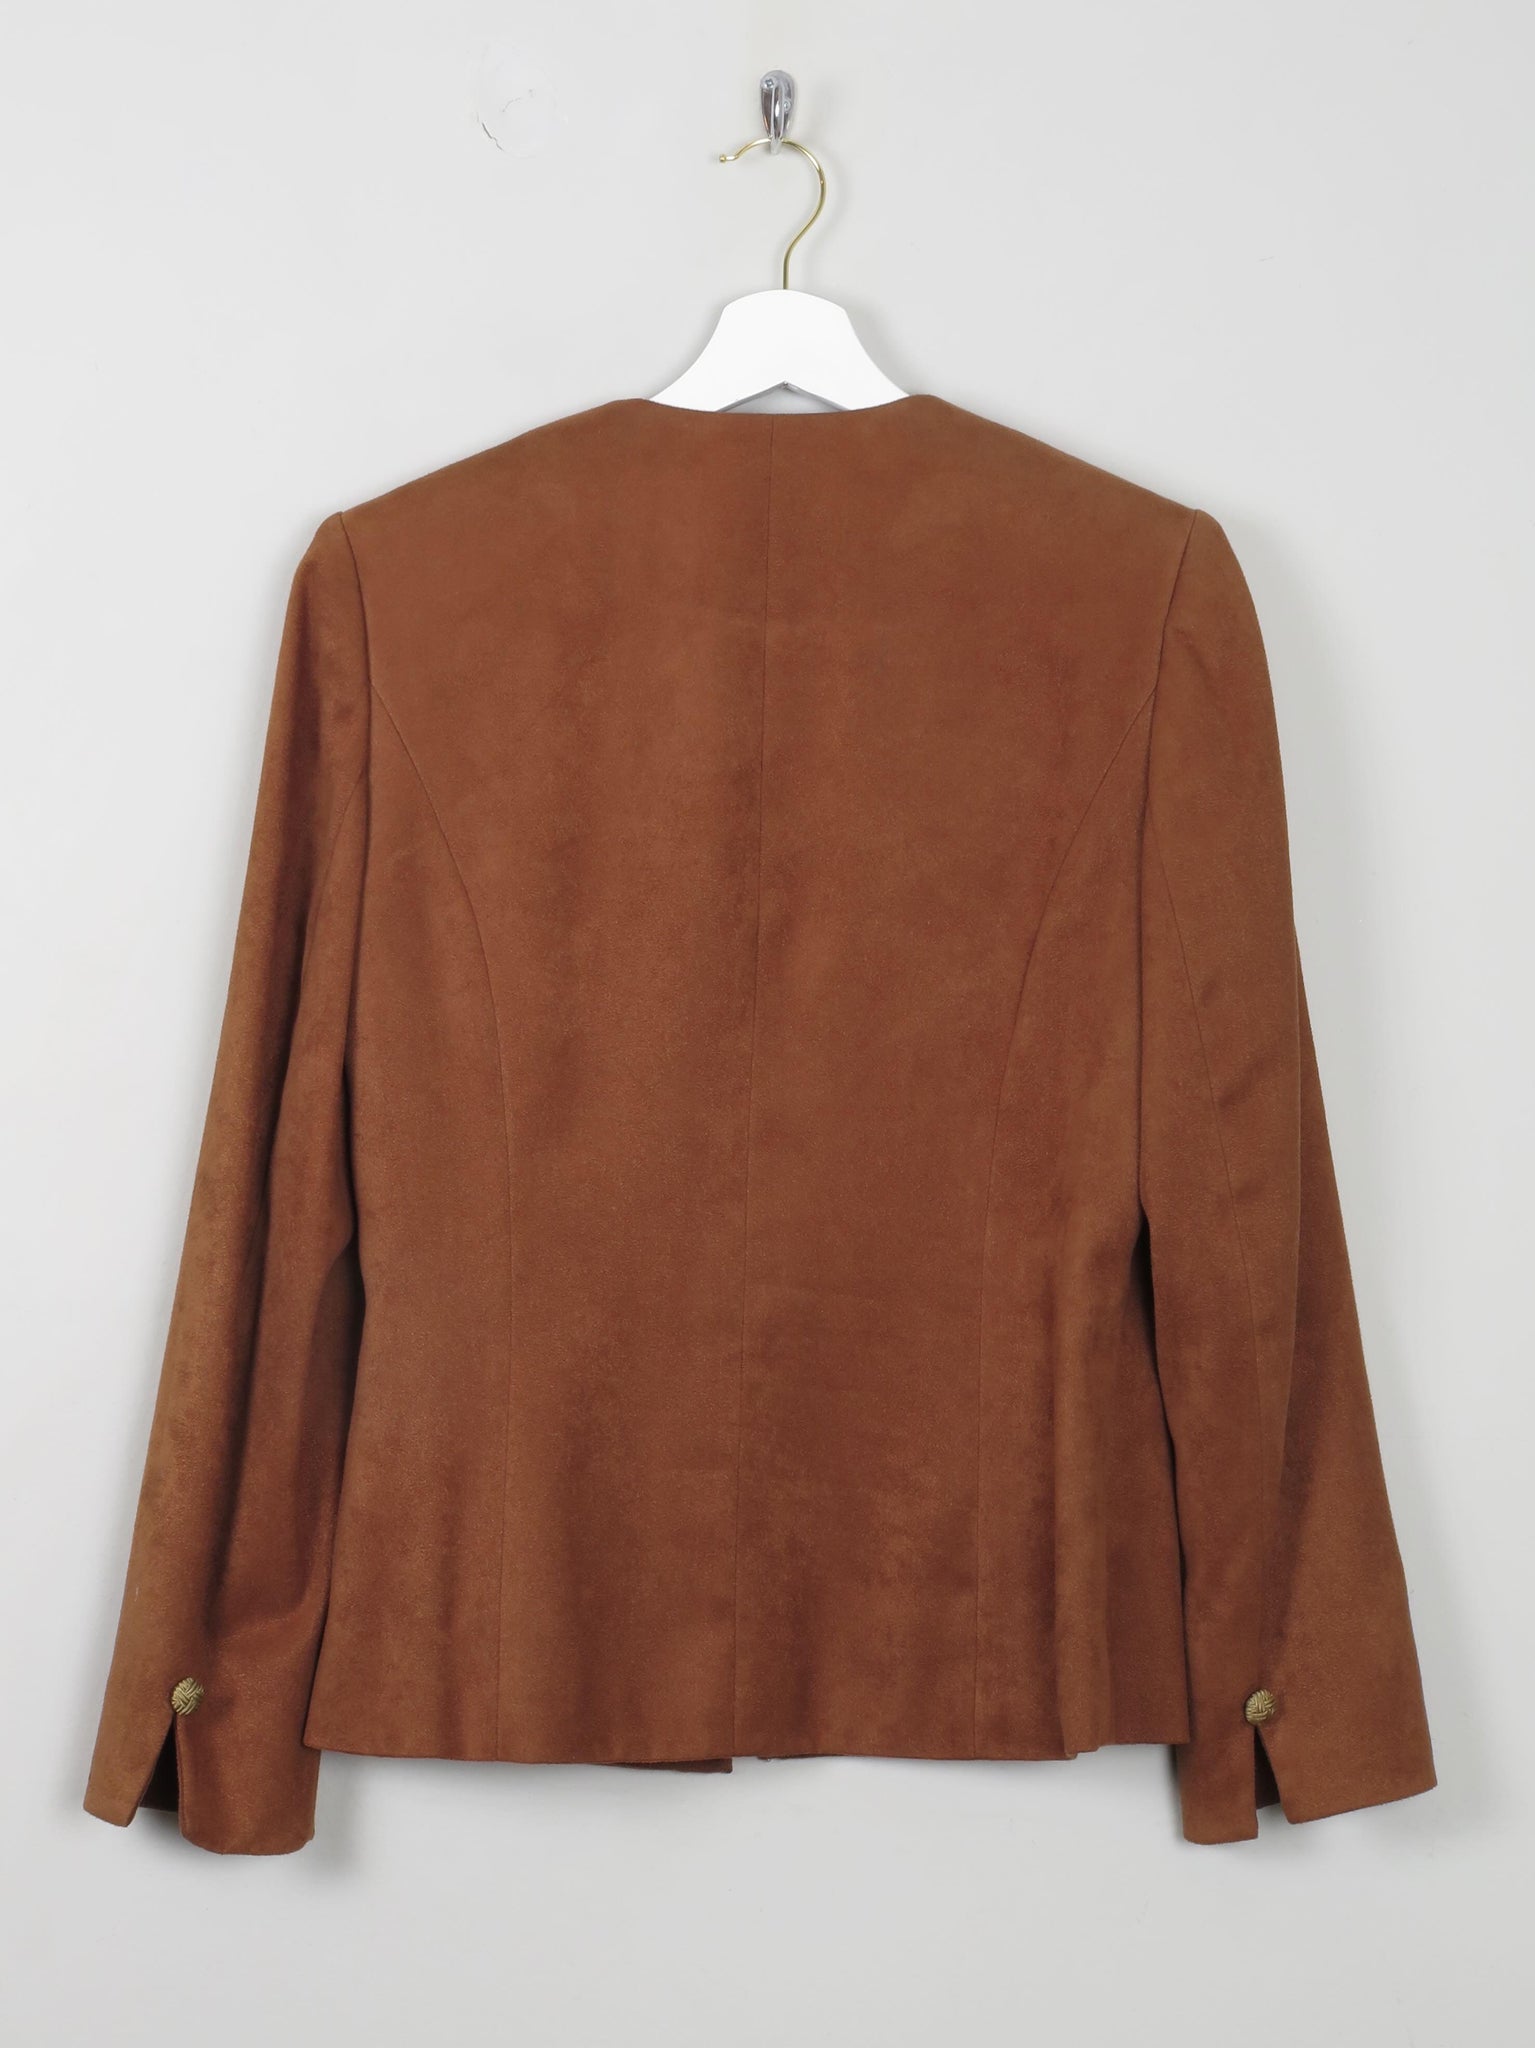 Women's Vintage Suede Style Fabric Rust/Tan Jacques Vert S - The Harlequin